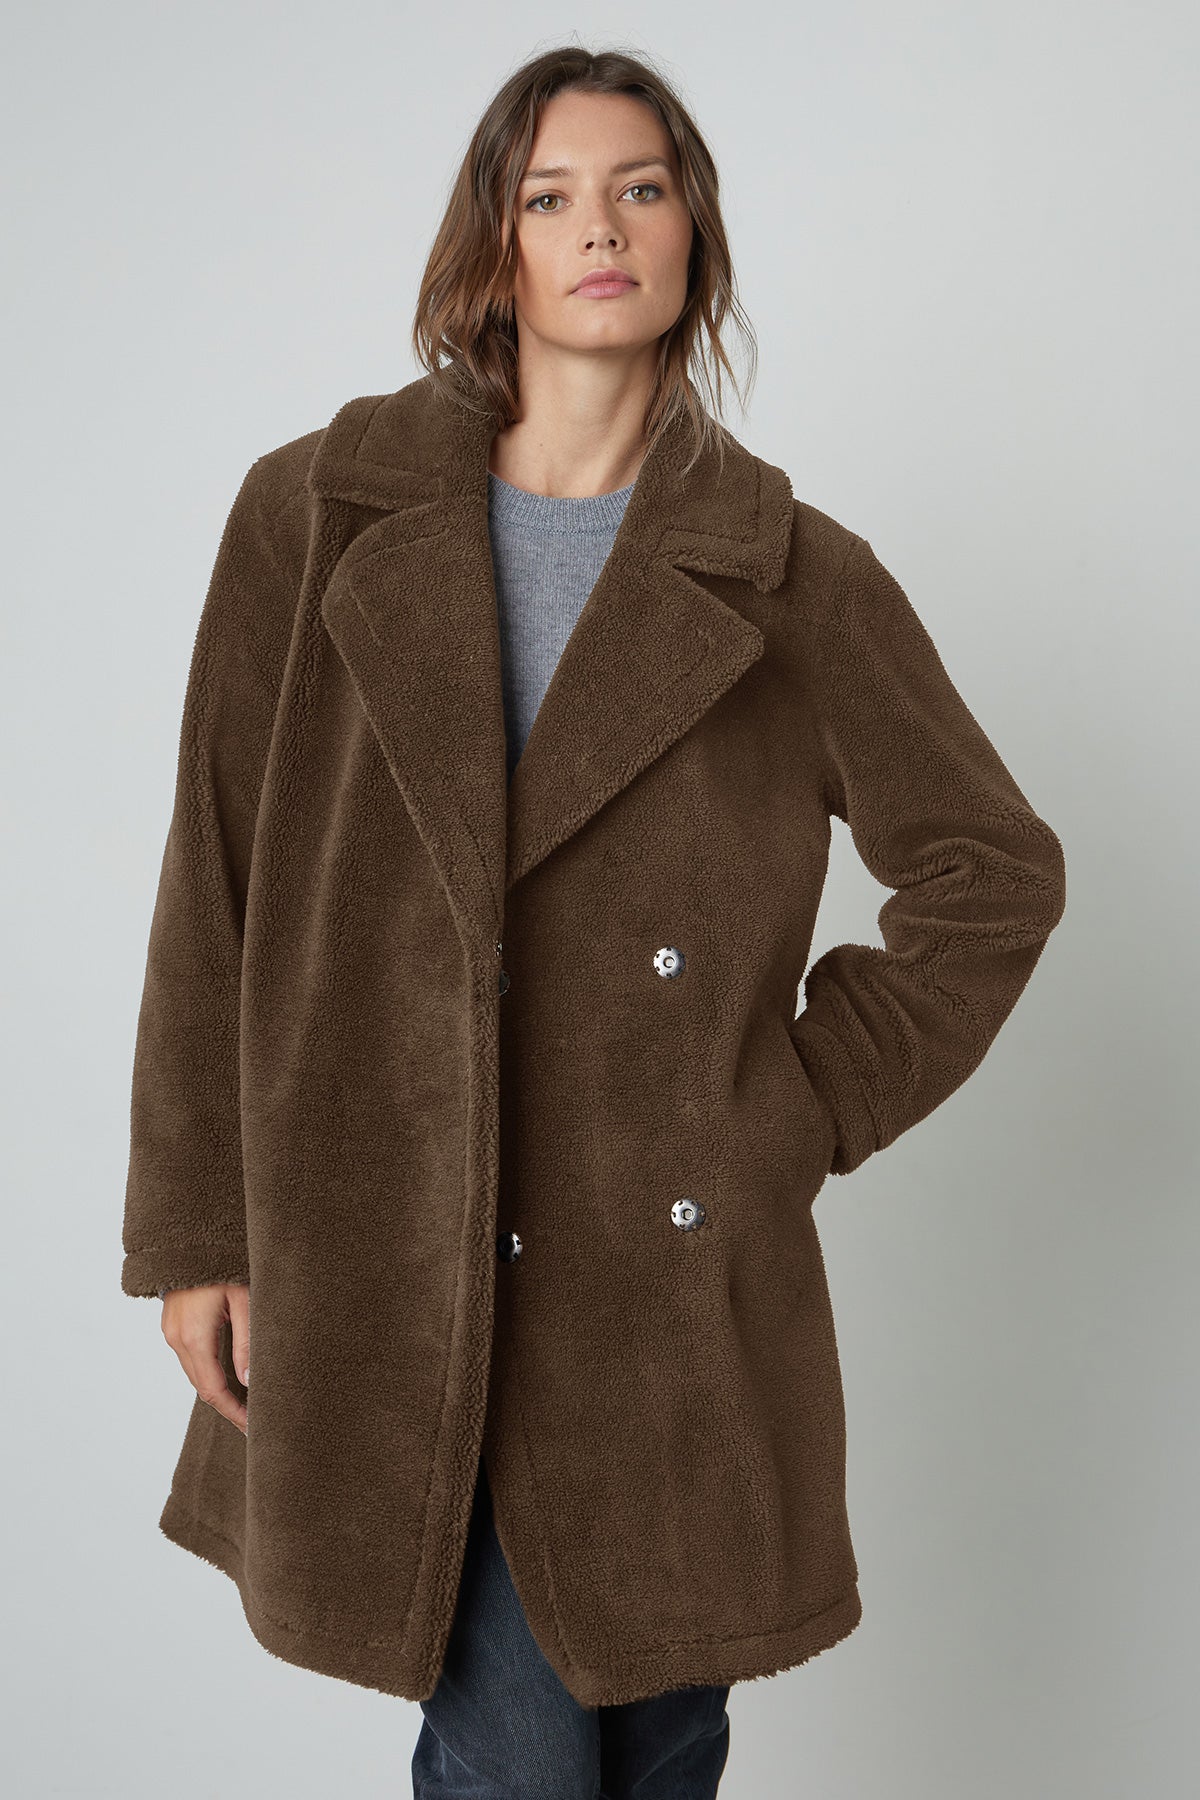 Christine Faux Sherpa Coat in Olive front-25062152274113